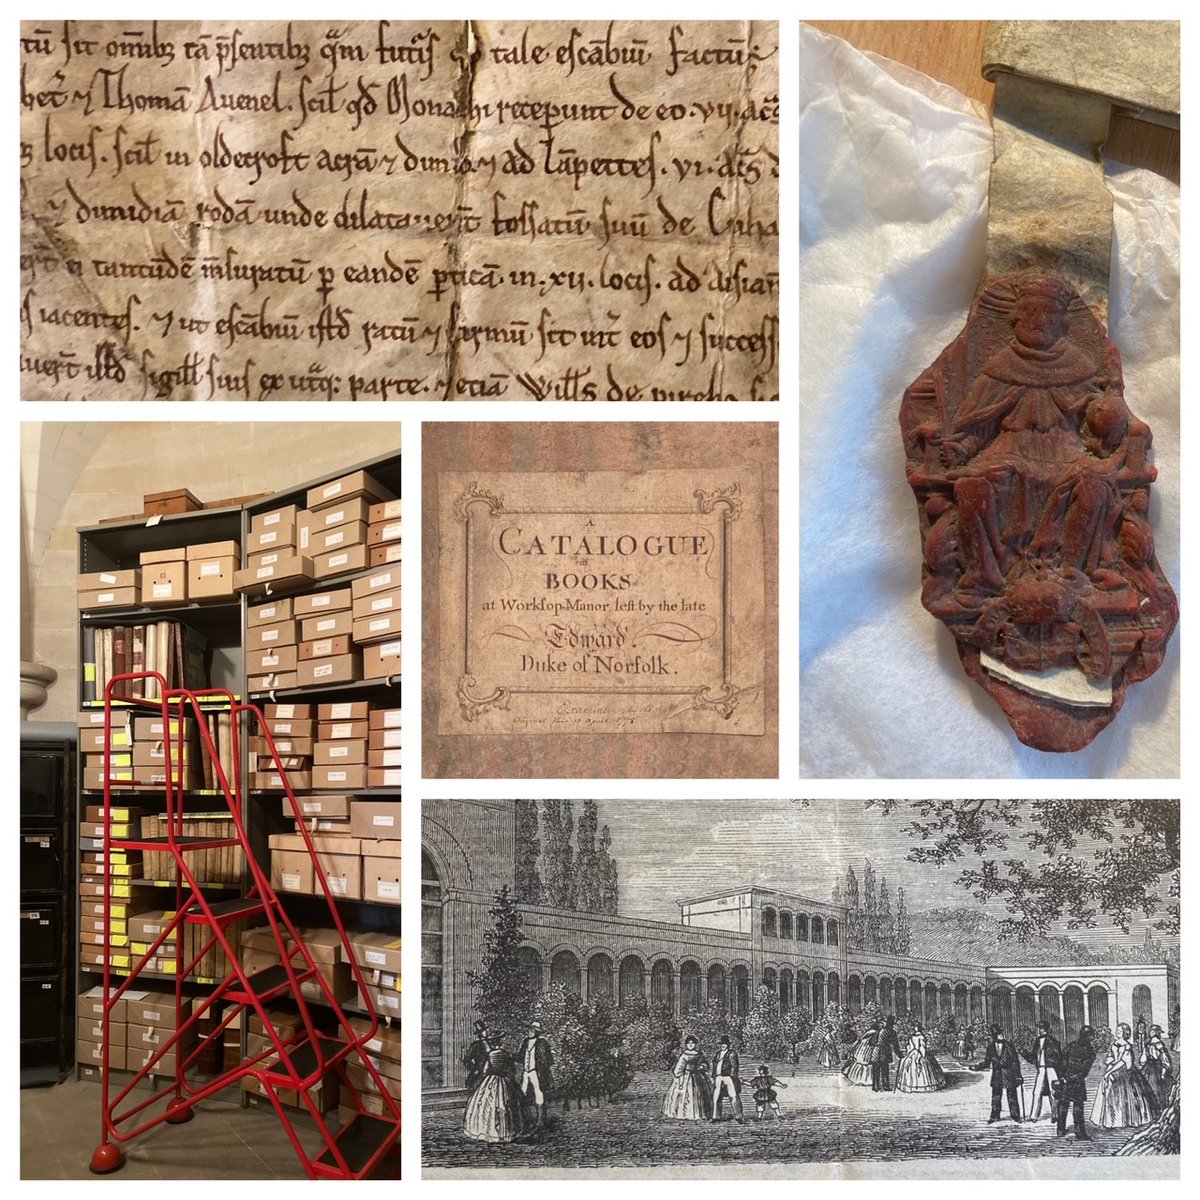 #WhyArchives are important... Archives contain our history, our ancestors, untold stories, unheard voices, mysteries, answers & questions. They detail life throughout time, triumphs, failures, advances,  relationships & so much more! @ARAScot #Archive30